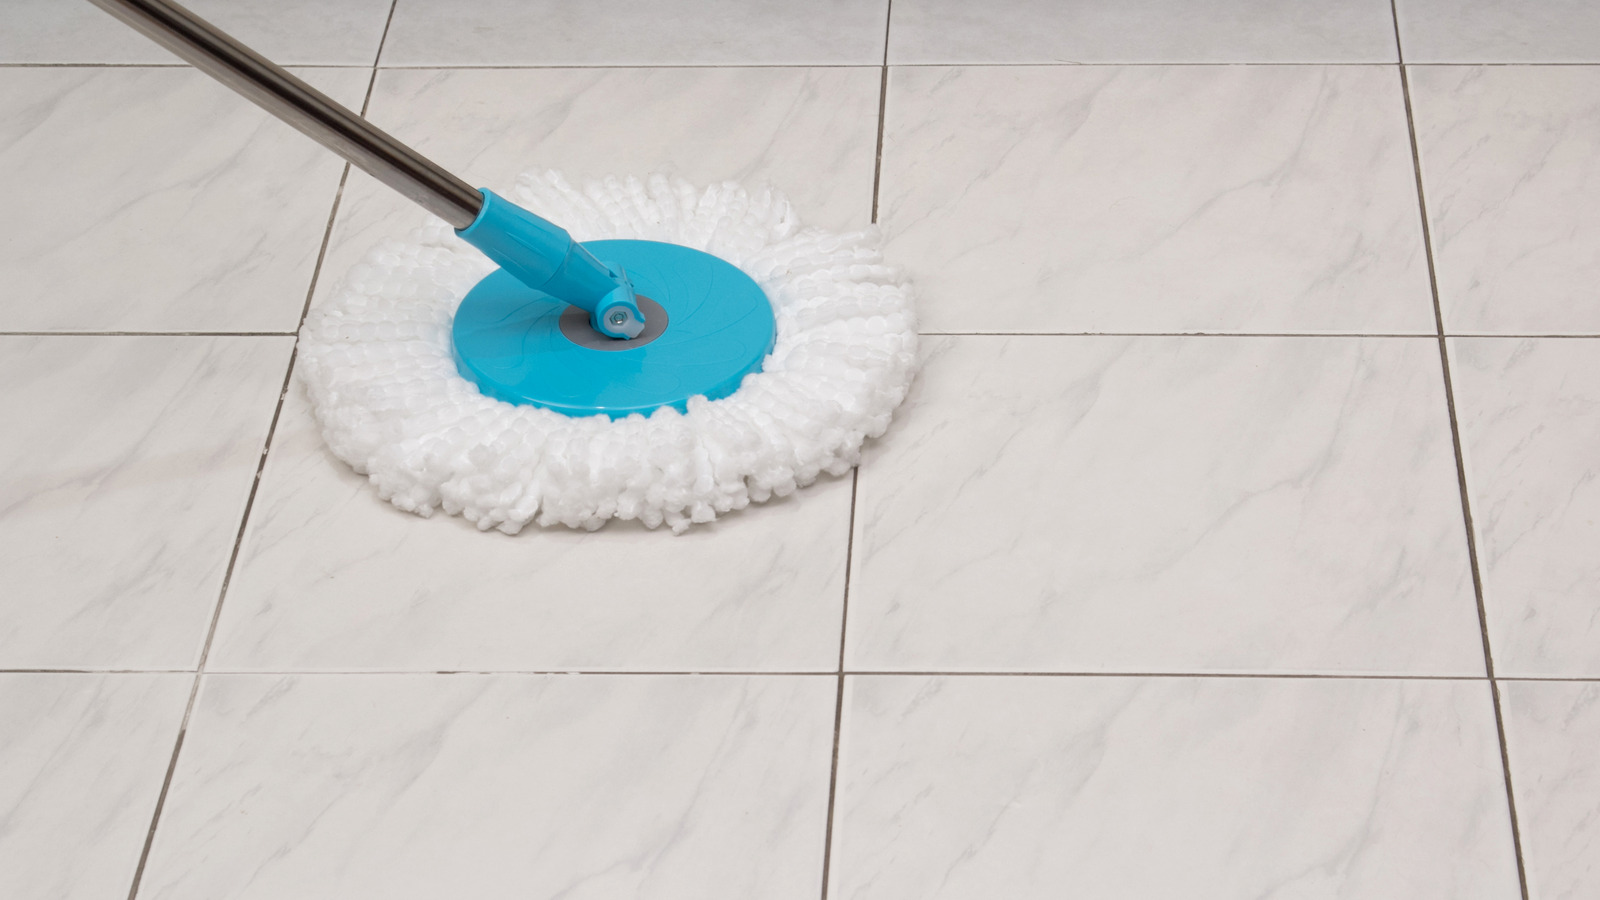 https://www.housedigest.com/img/gallery/the-household-essential-thatll-bring-your-grimy-tile-floors-back-to-life/l-intro-1698764494.jpg